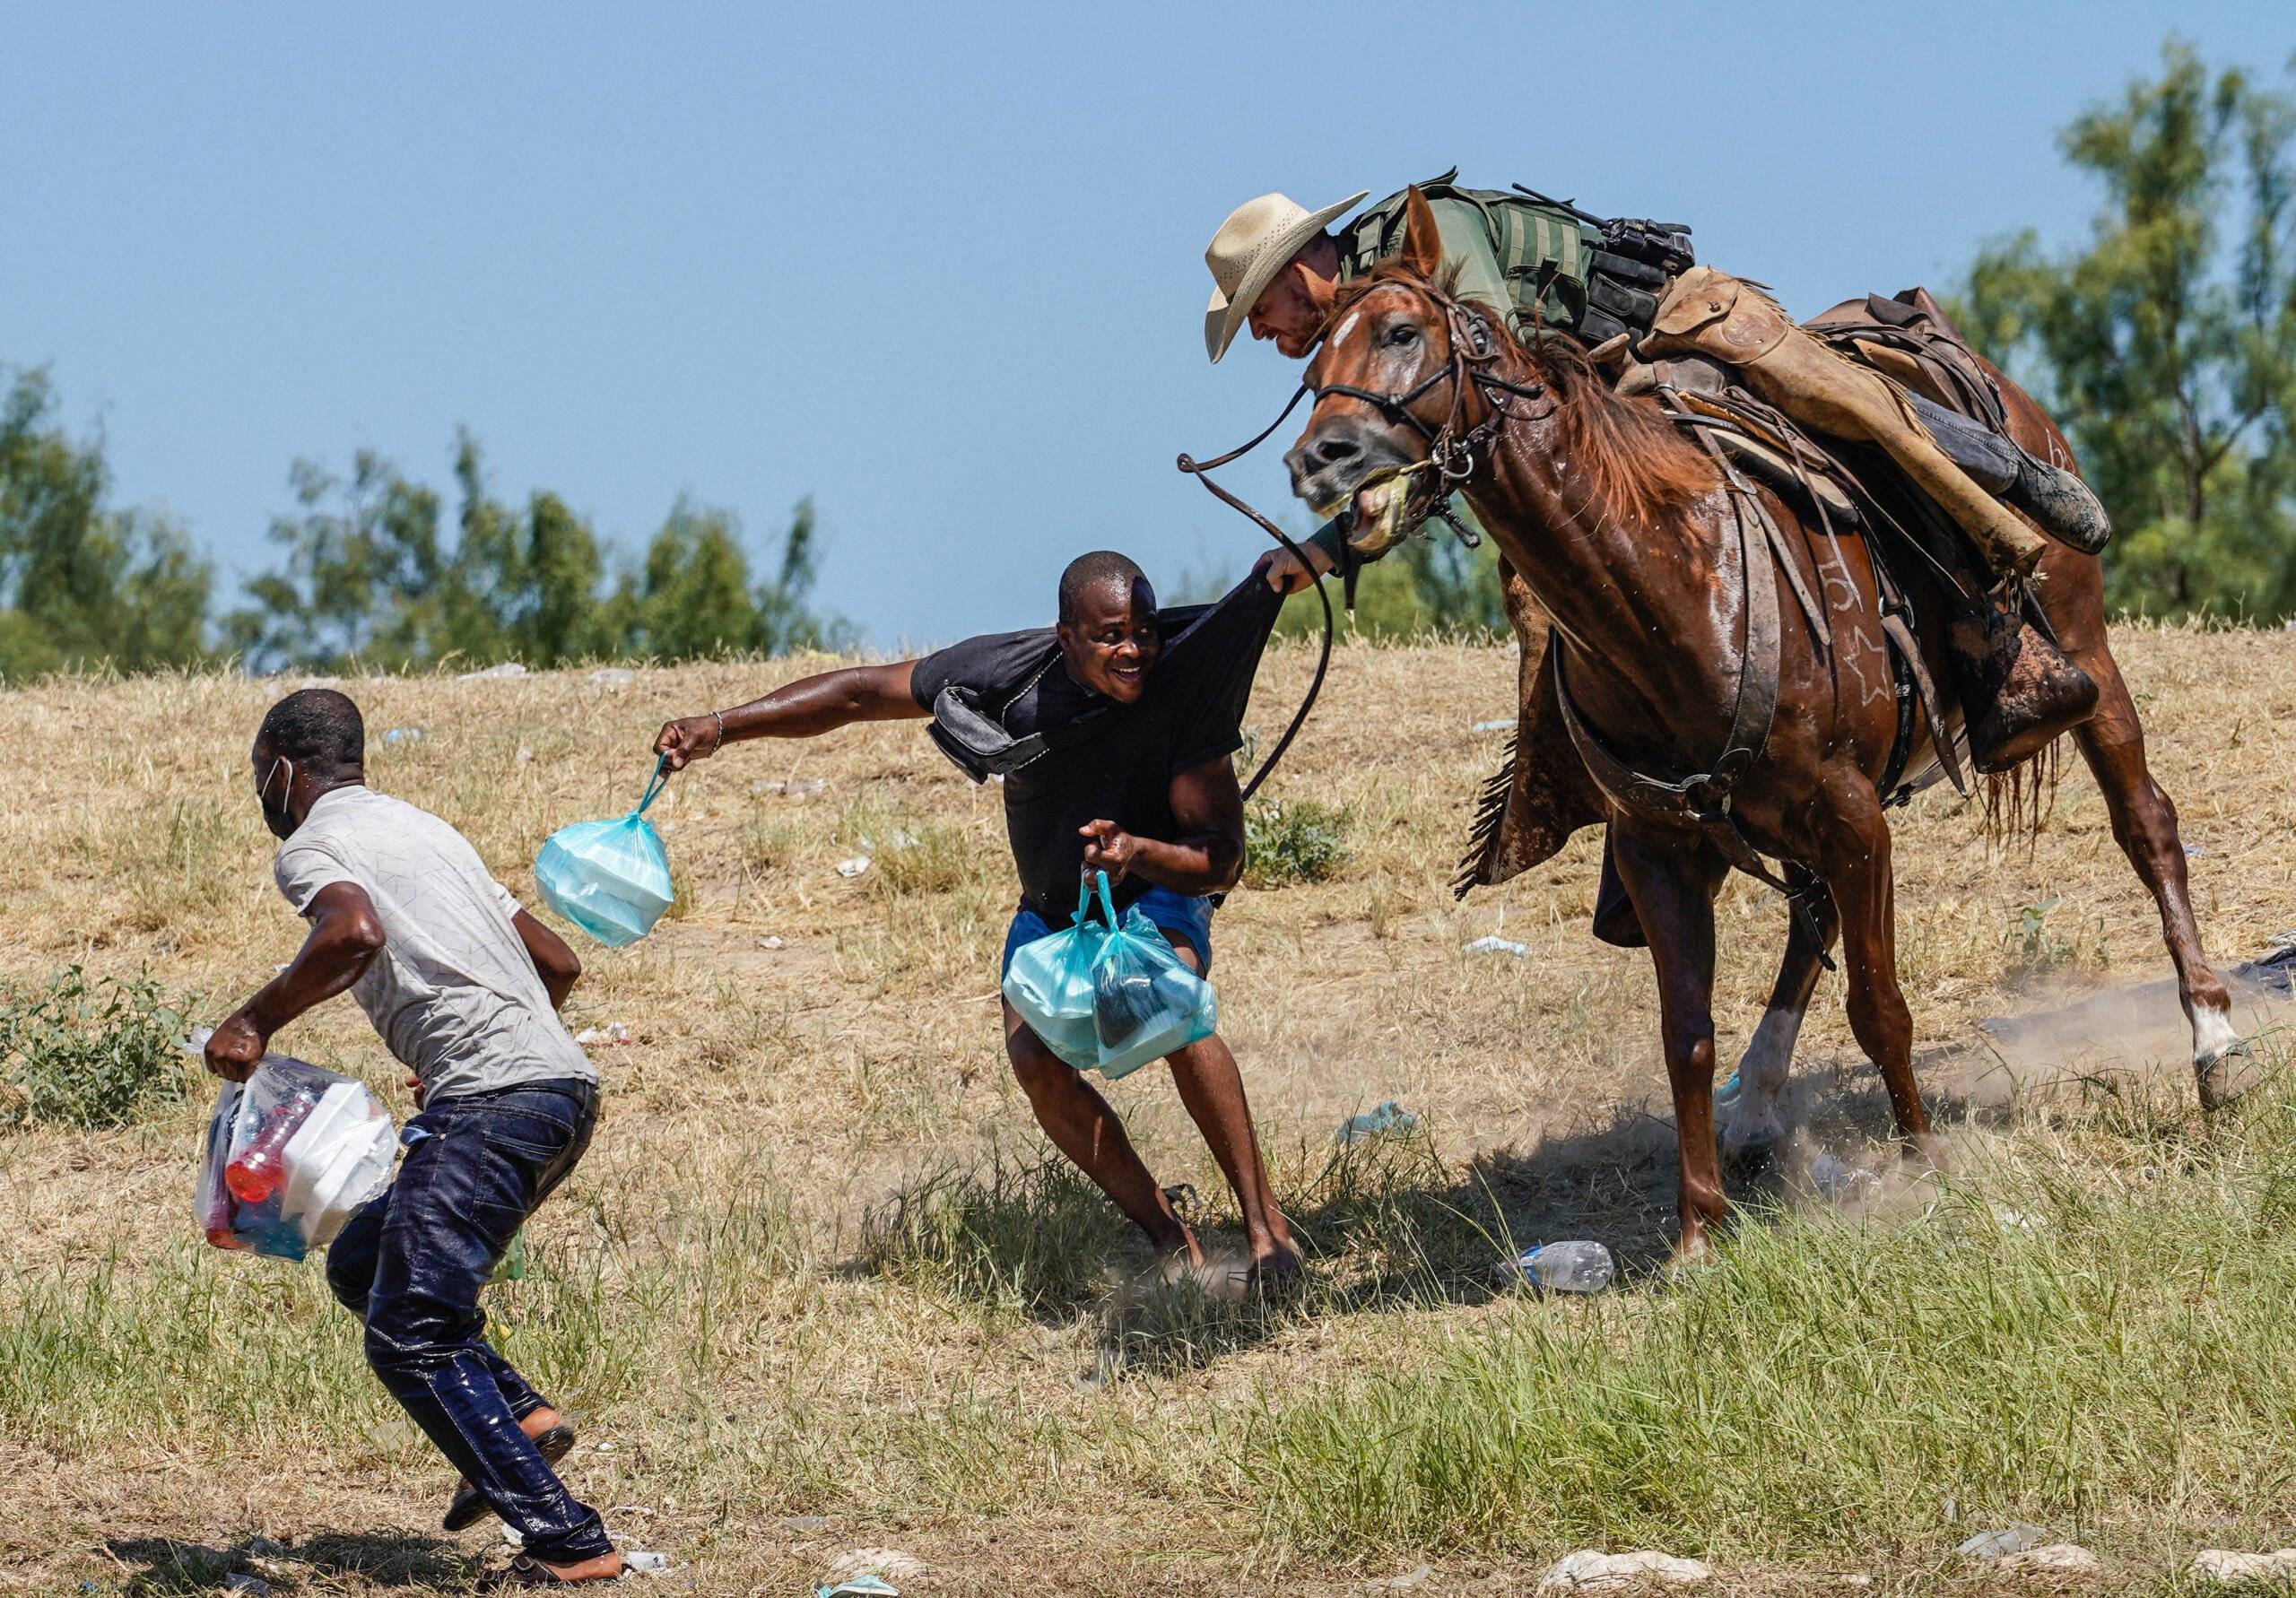 A United States Border Patrol agent on horseback tries to stop a Haitian migrant from entering an encampment on the banks of the Rio Grande near the Acuna Del Rio International Bridge in Del Rio, Texas on September 19, 2021. - The United States said Saturday it would ramp up deportation flights for thousands of migrants who flooded into the Texas border city of Del Rio, as authorities scramble to alleviate a burgeoning crisis for President Joe Biden's administration. (Photo by PAUL RATJE / AFP)